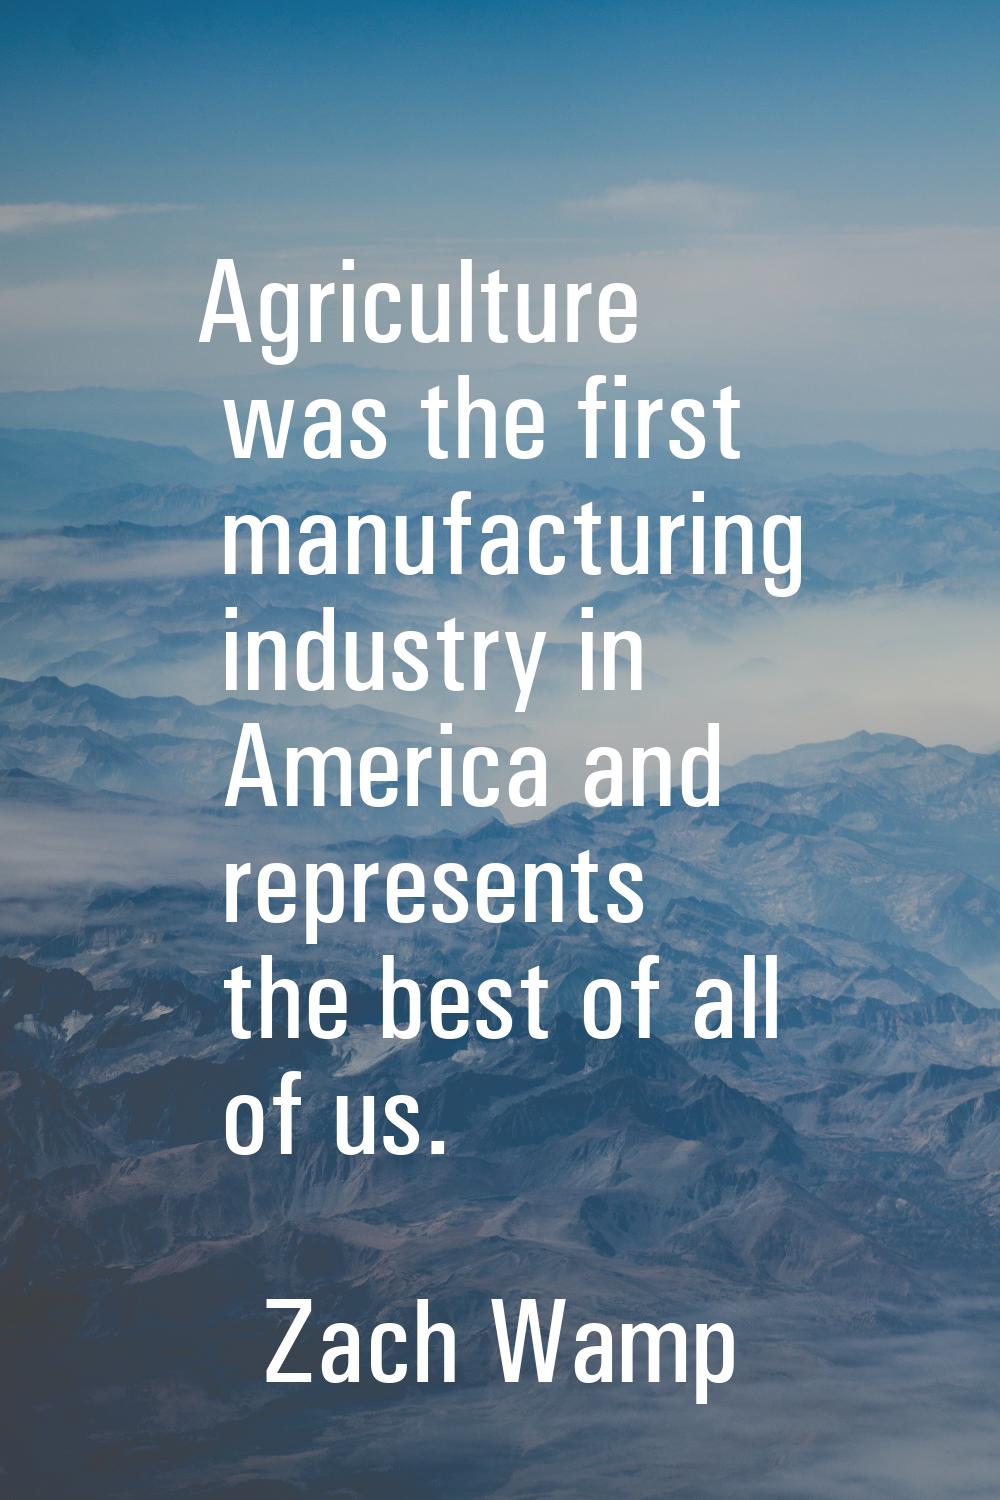 Agriculture was the first manufacturing industry in America and represents the best of all of us.